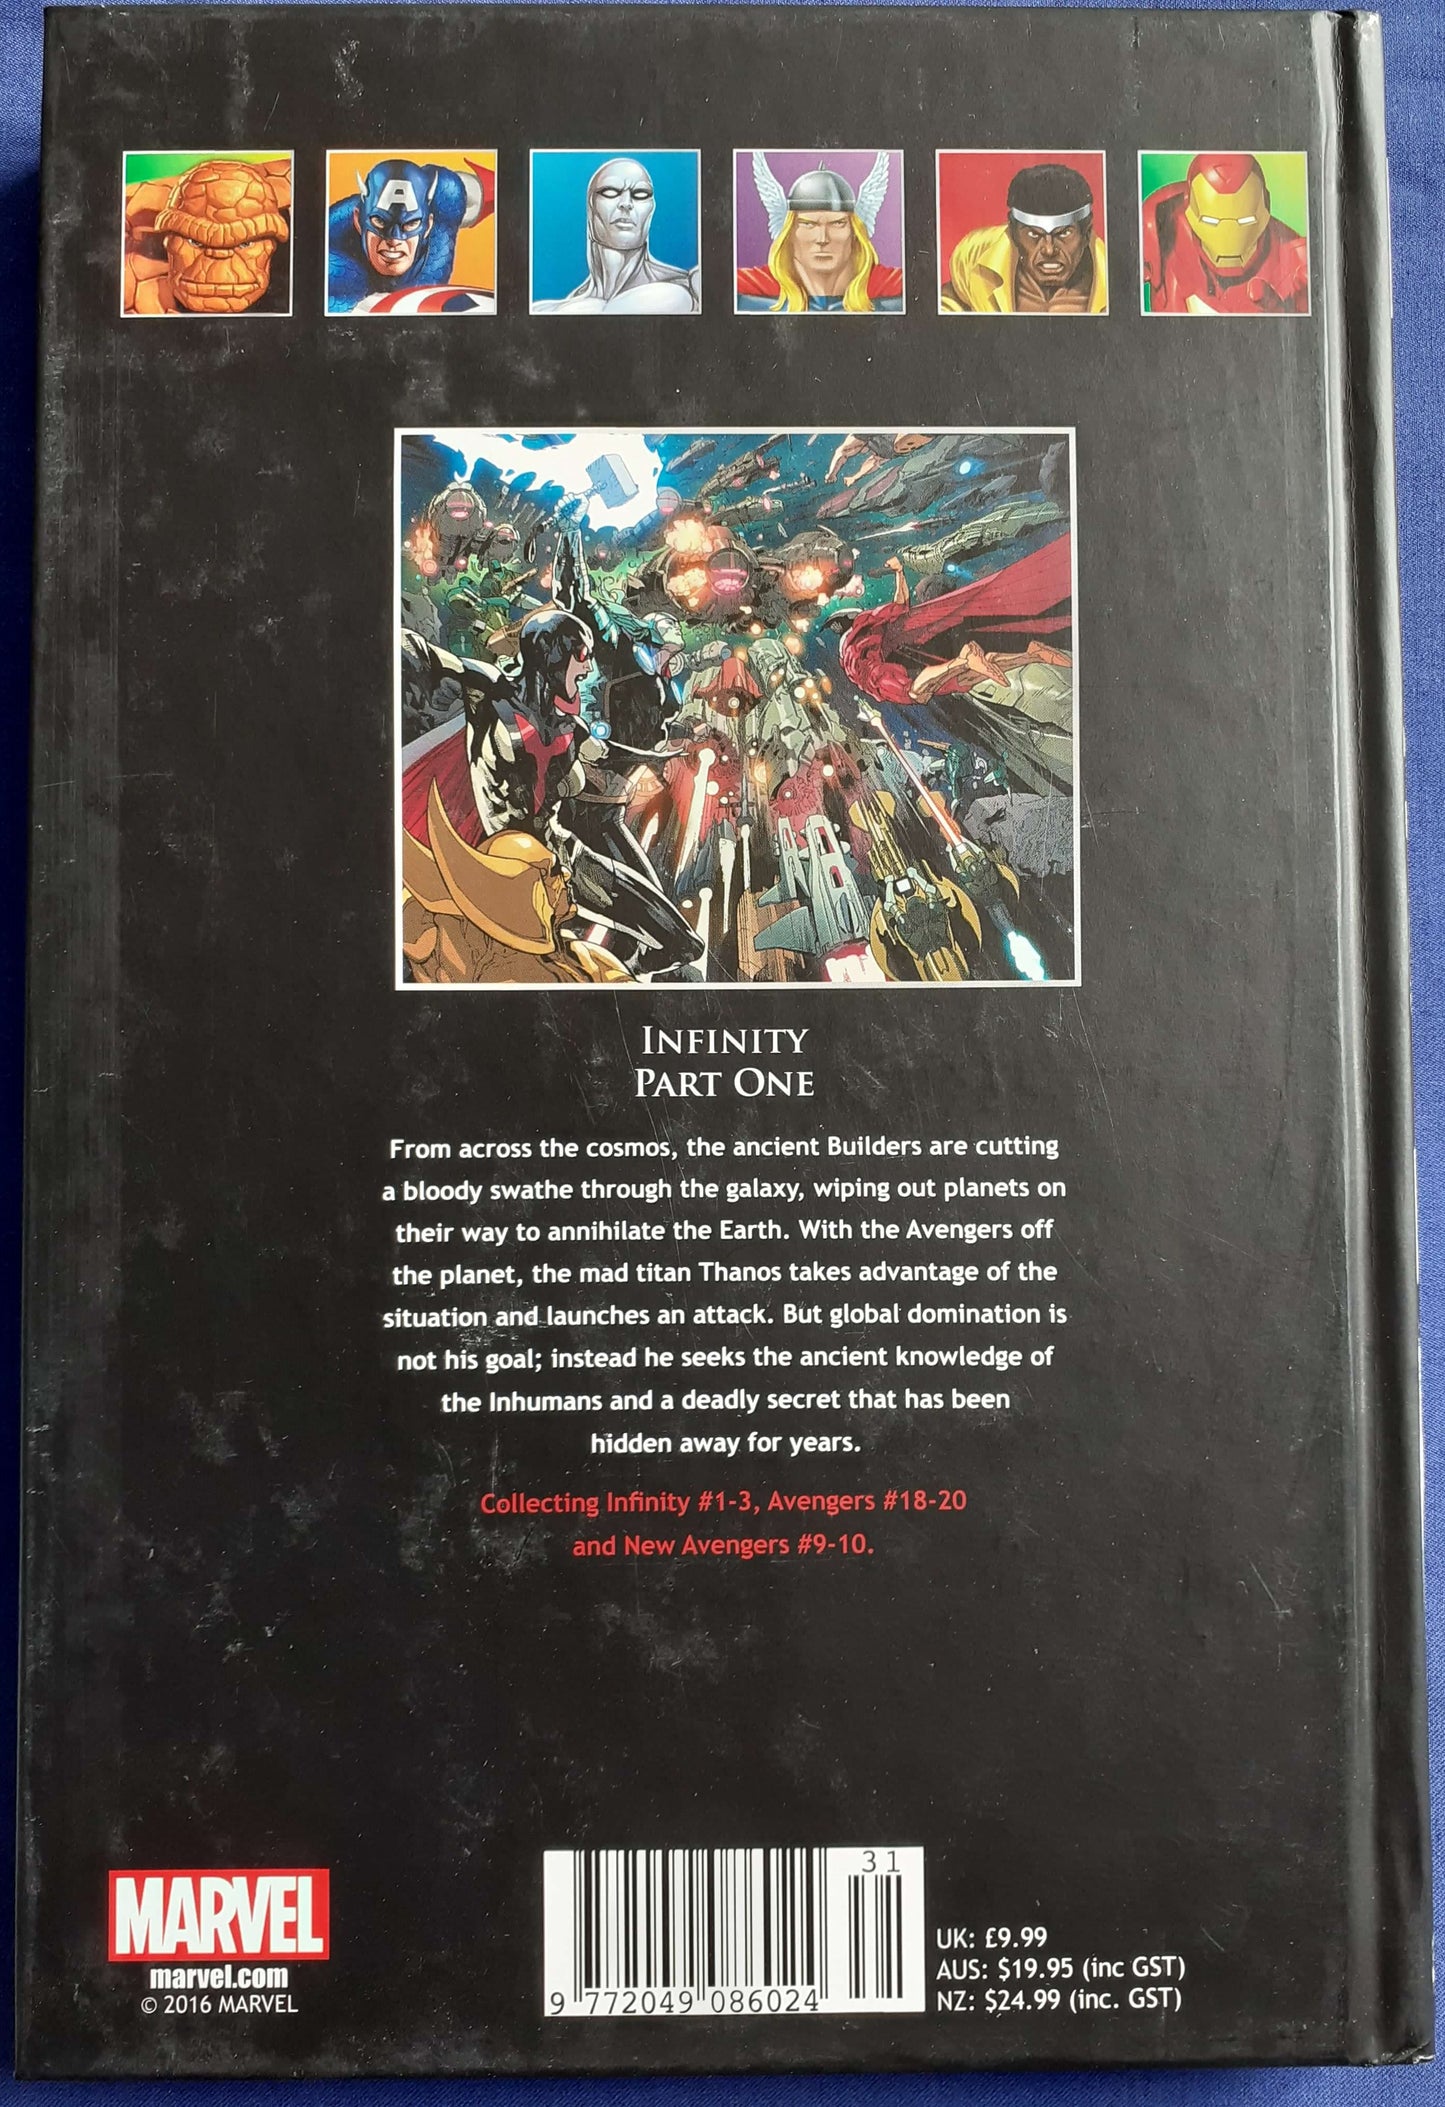 avengers, graphic novel, marvel graphic novels, marvel ultimate graphic collection - Best Books